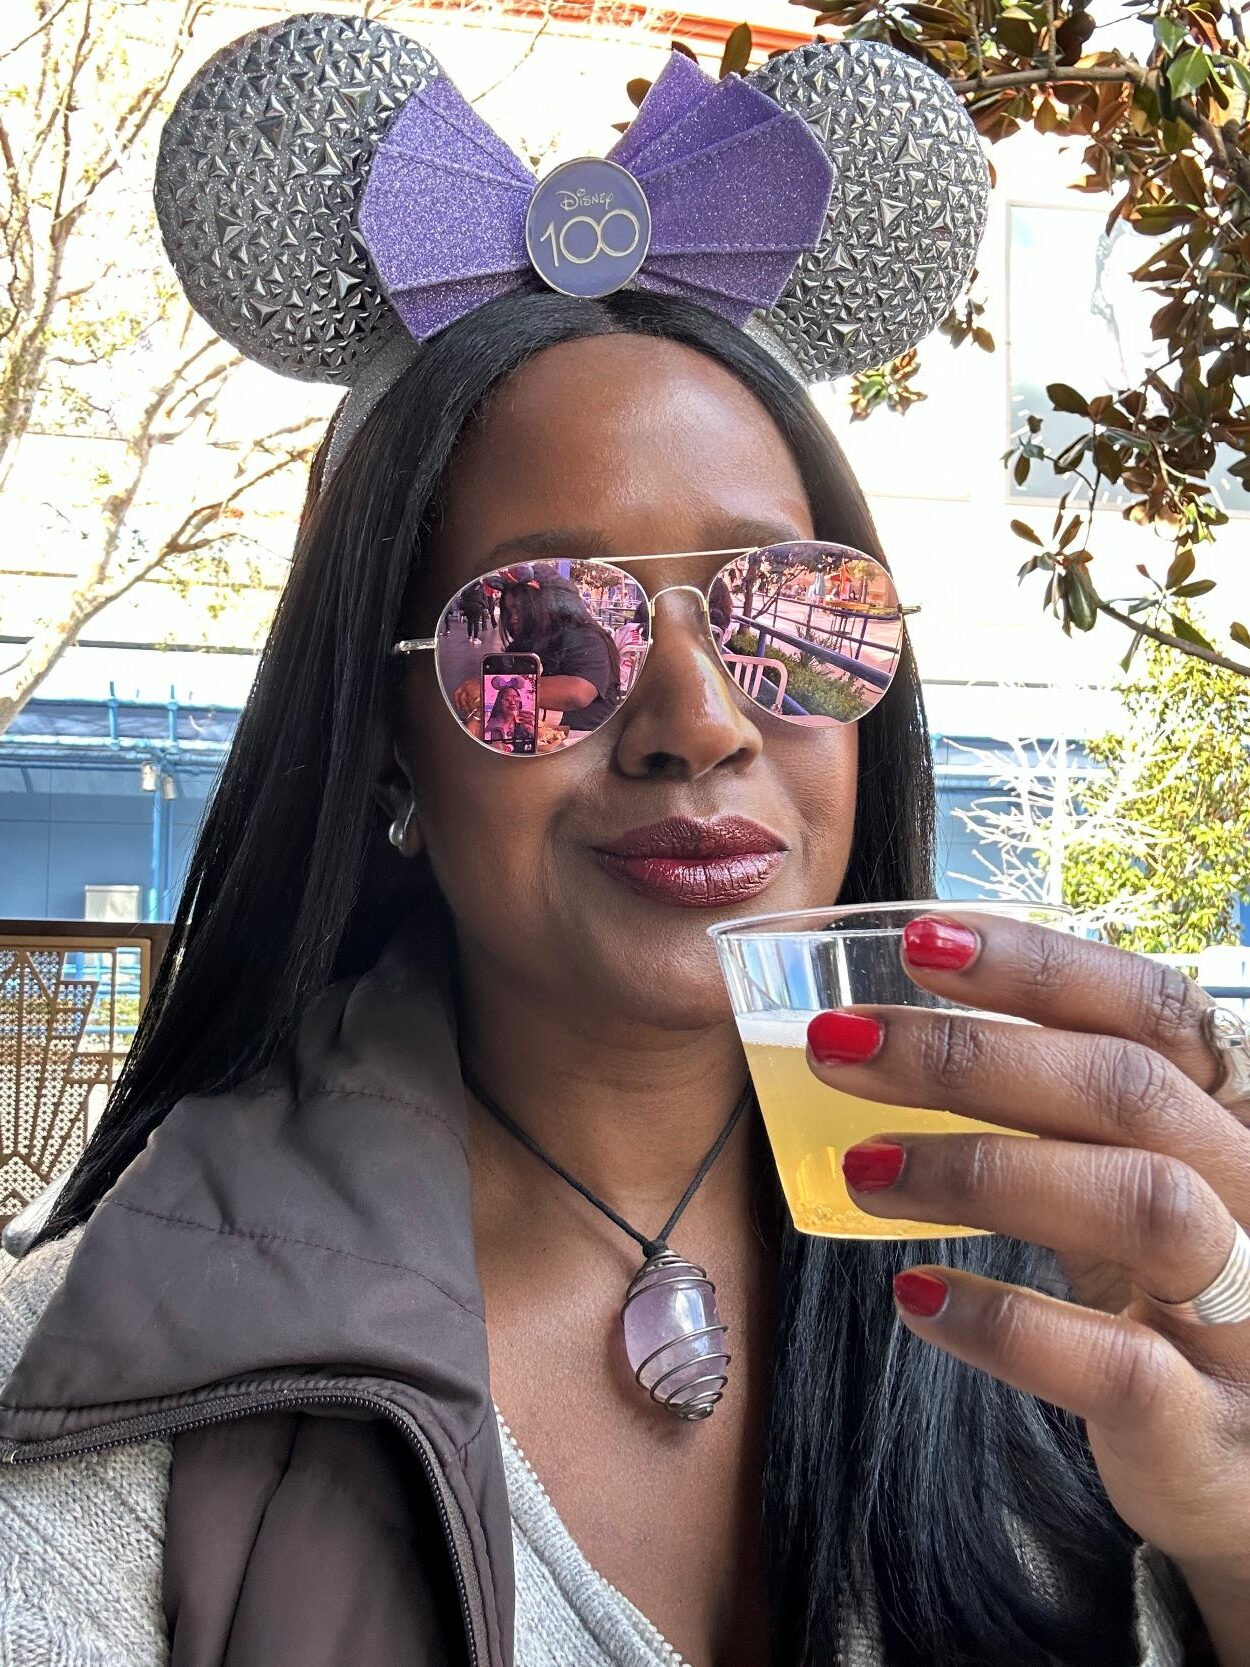 An image of lifestyle blogger Ariel at the Disney California Adventure Food & Wine Festival.